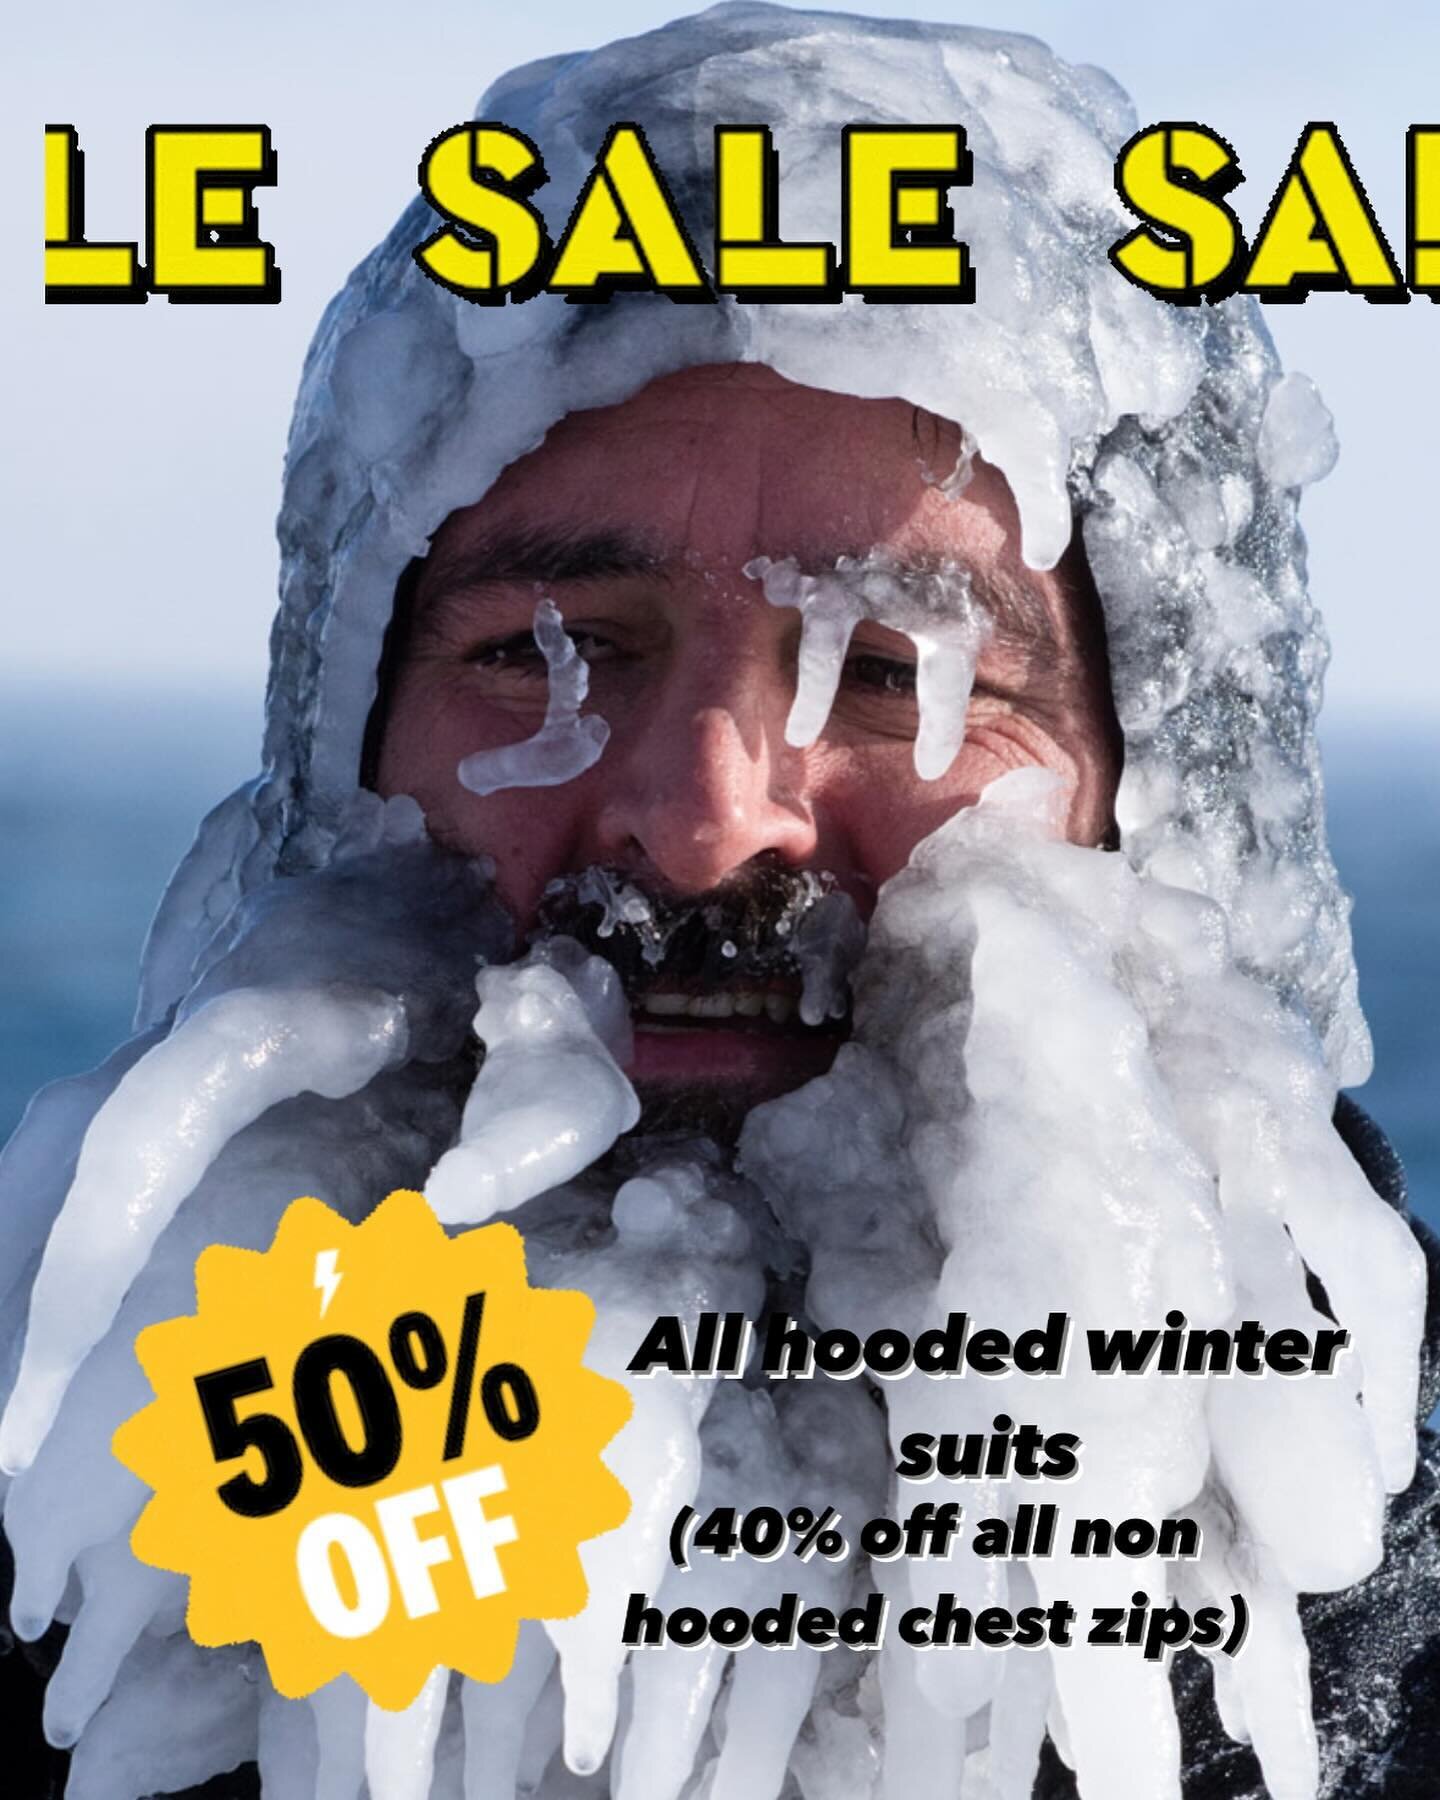 Super Sale ! 50% off all hooded winter suits and 40% off all non hooded chest zip winter suits ! Grab a bargain! Xcel, Rip Curl and Cskins 🙌 #sale #wetsuits